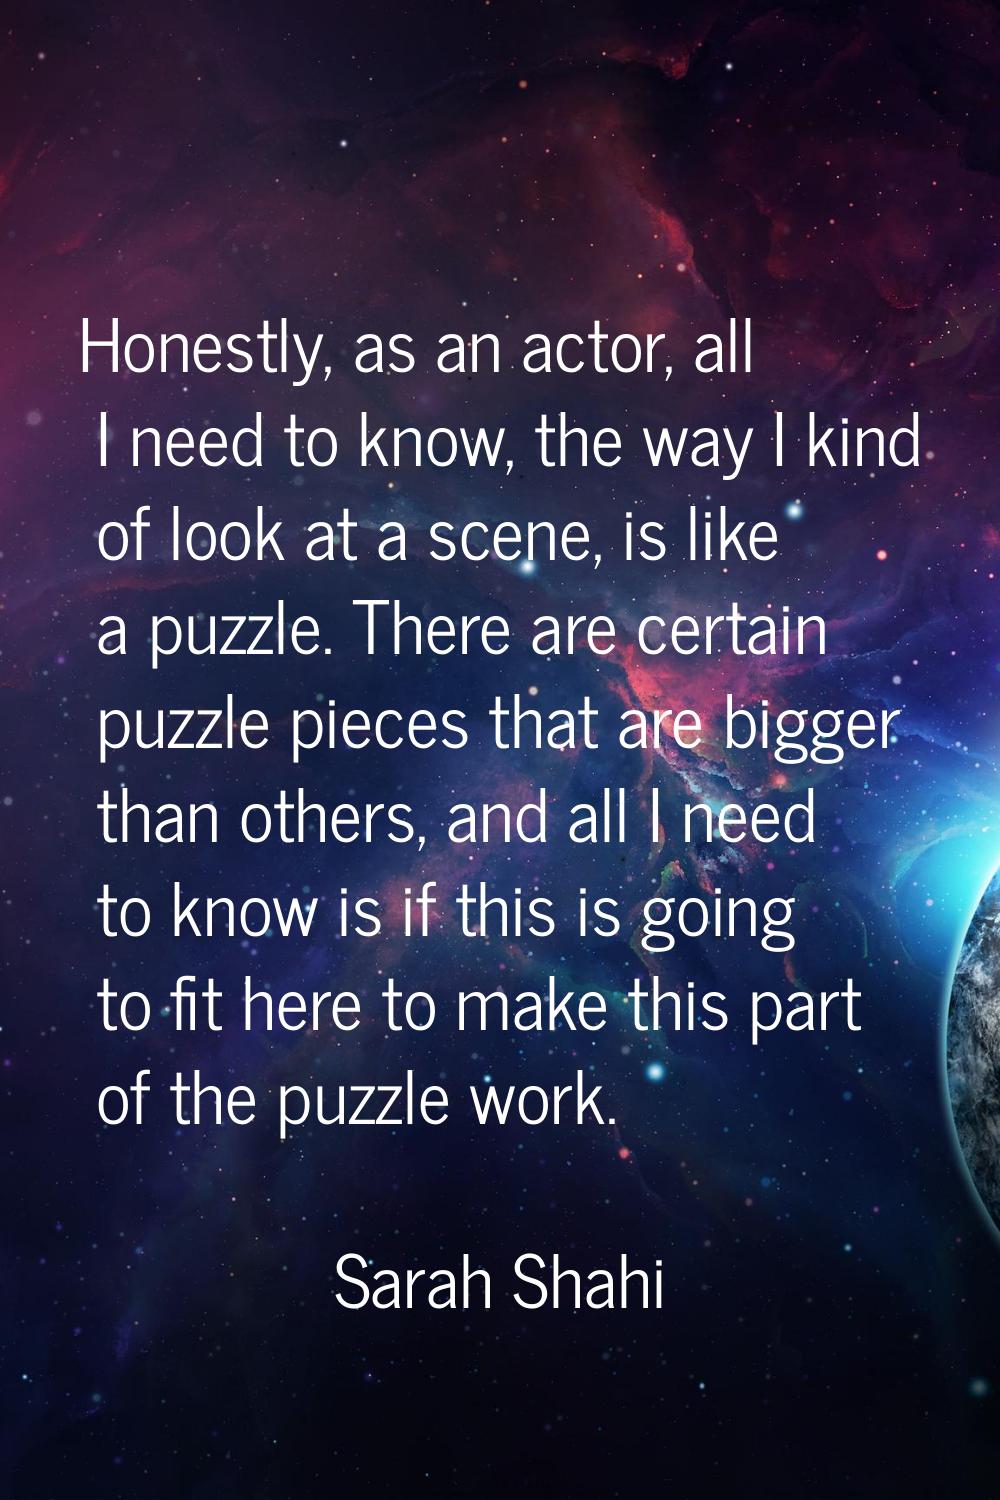 Honestly, as an actor, all I need to know, the way I kind of look at a scene, is like a puzzle. The